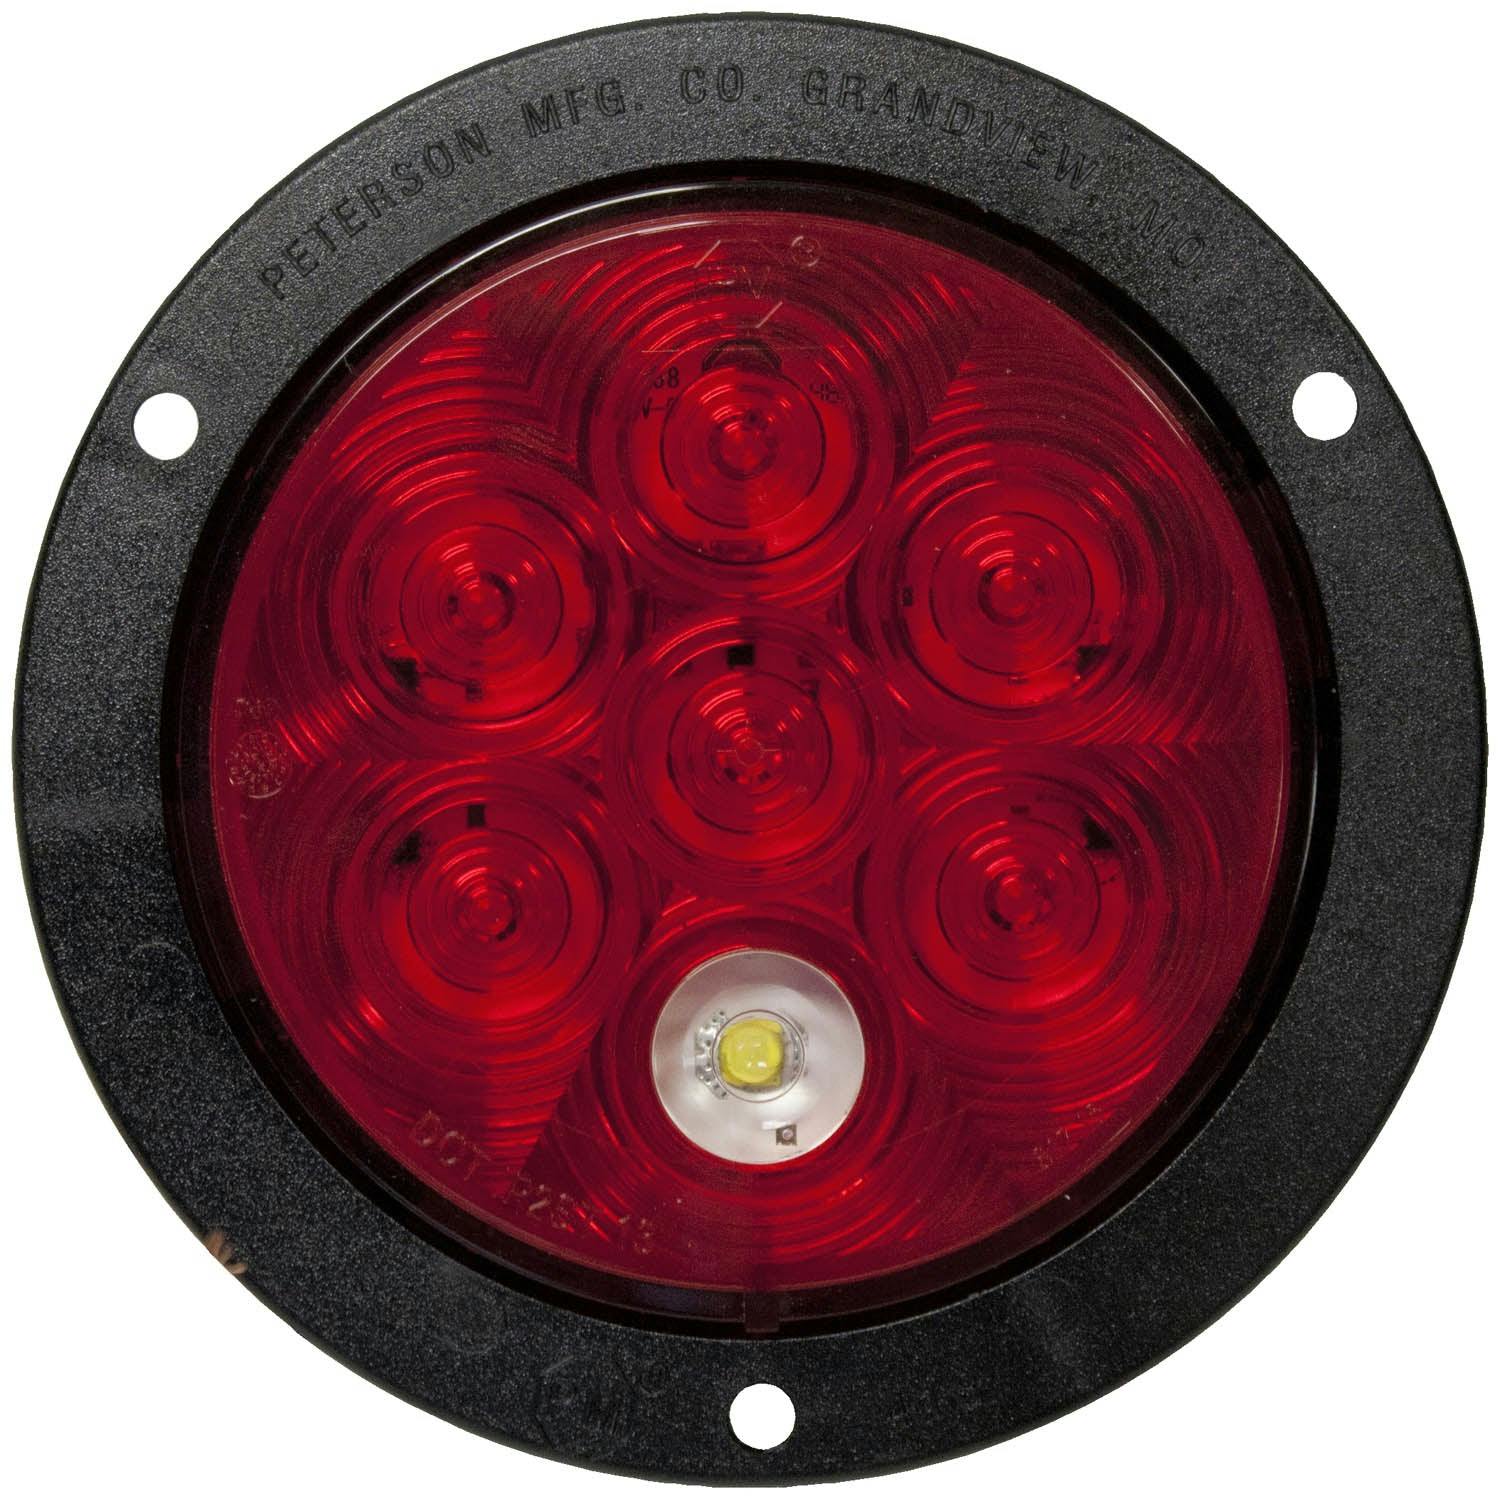 LED Stop/Turn/Tail, & Back-Up Light, Round, Flange-Mount w/ Plug, Kit 4", red + white (Pack of 6)